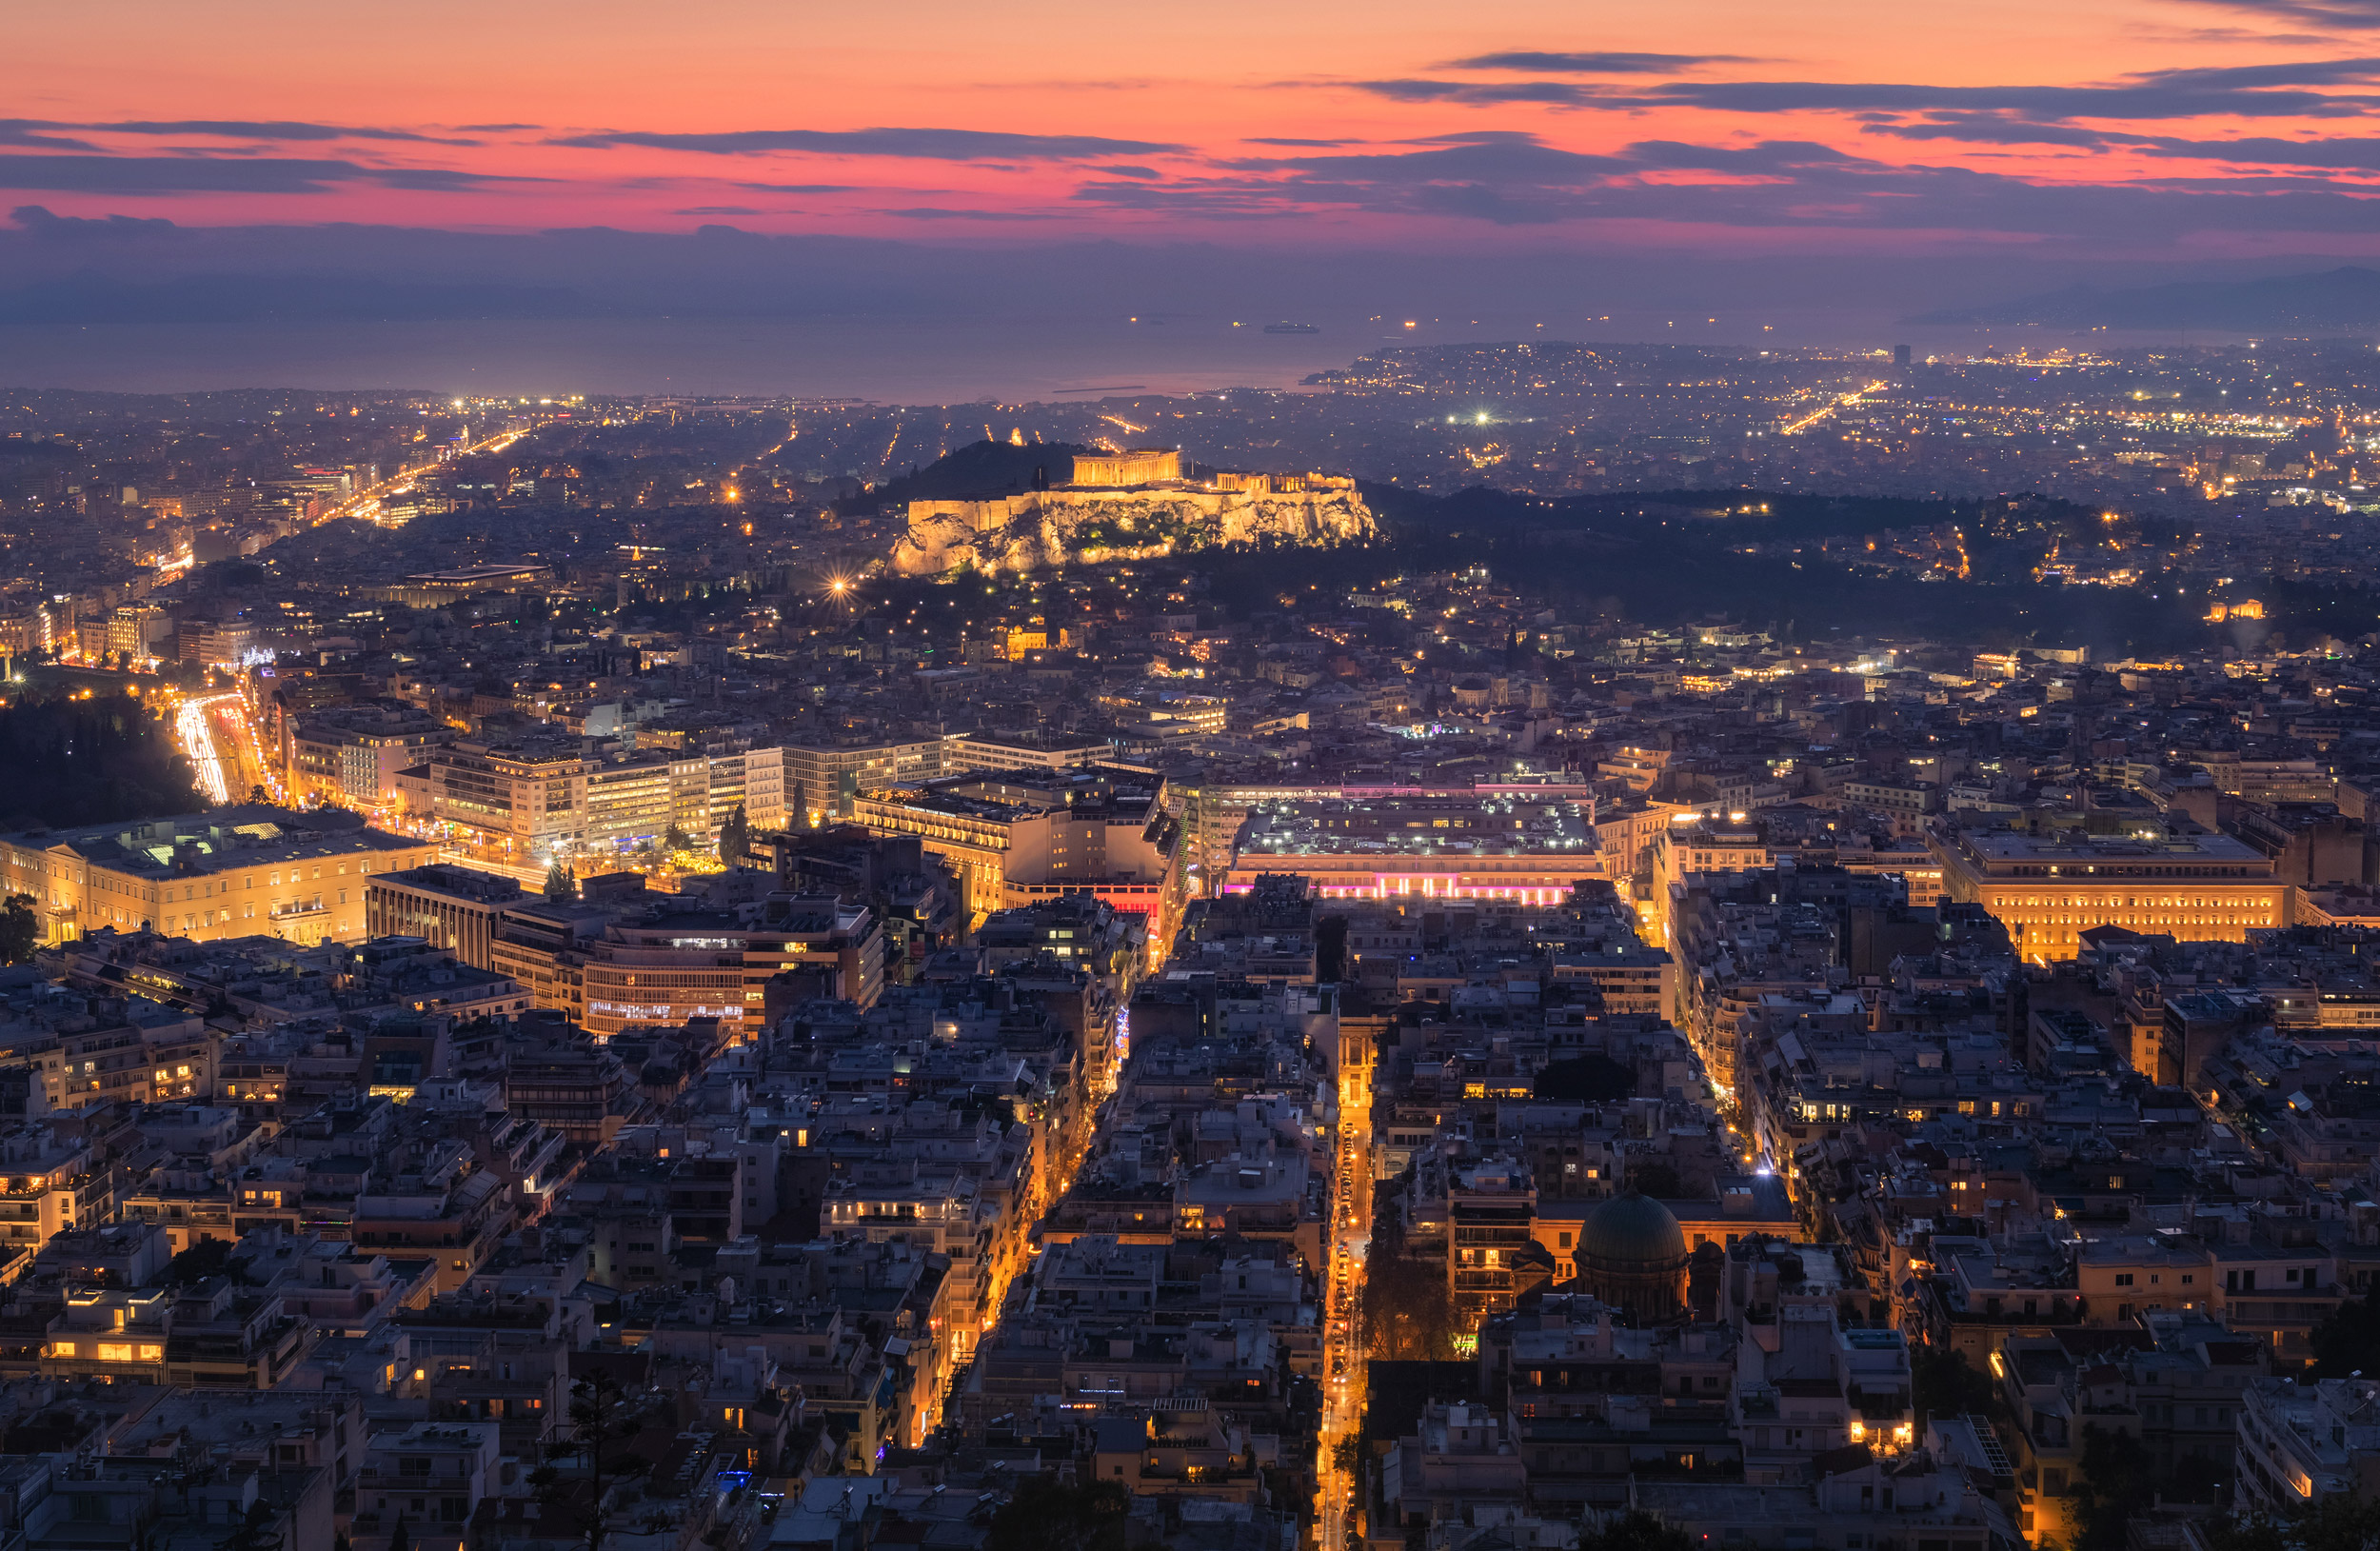 Aerial view of the Acropolis and city of Athens seen at dawn fro